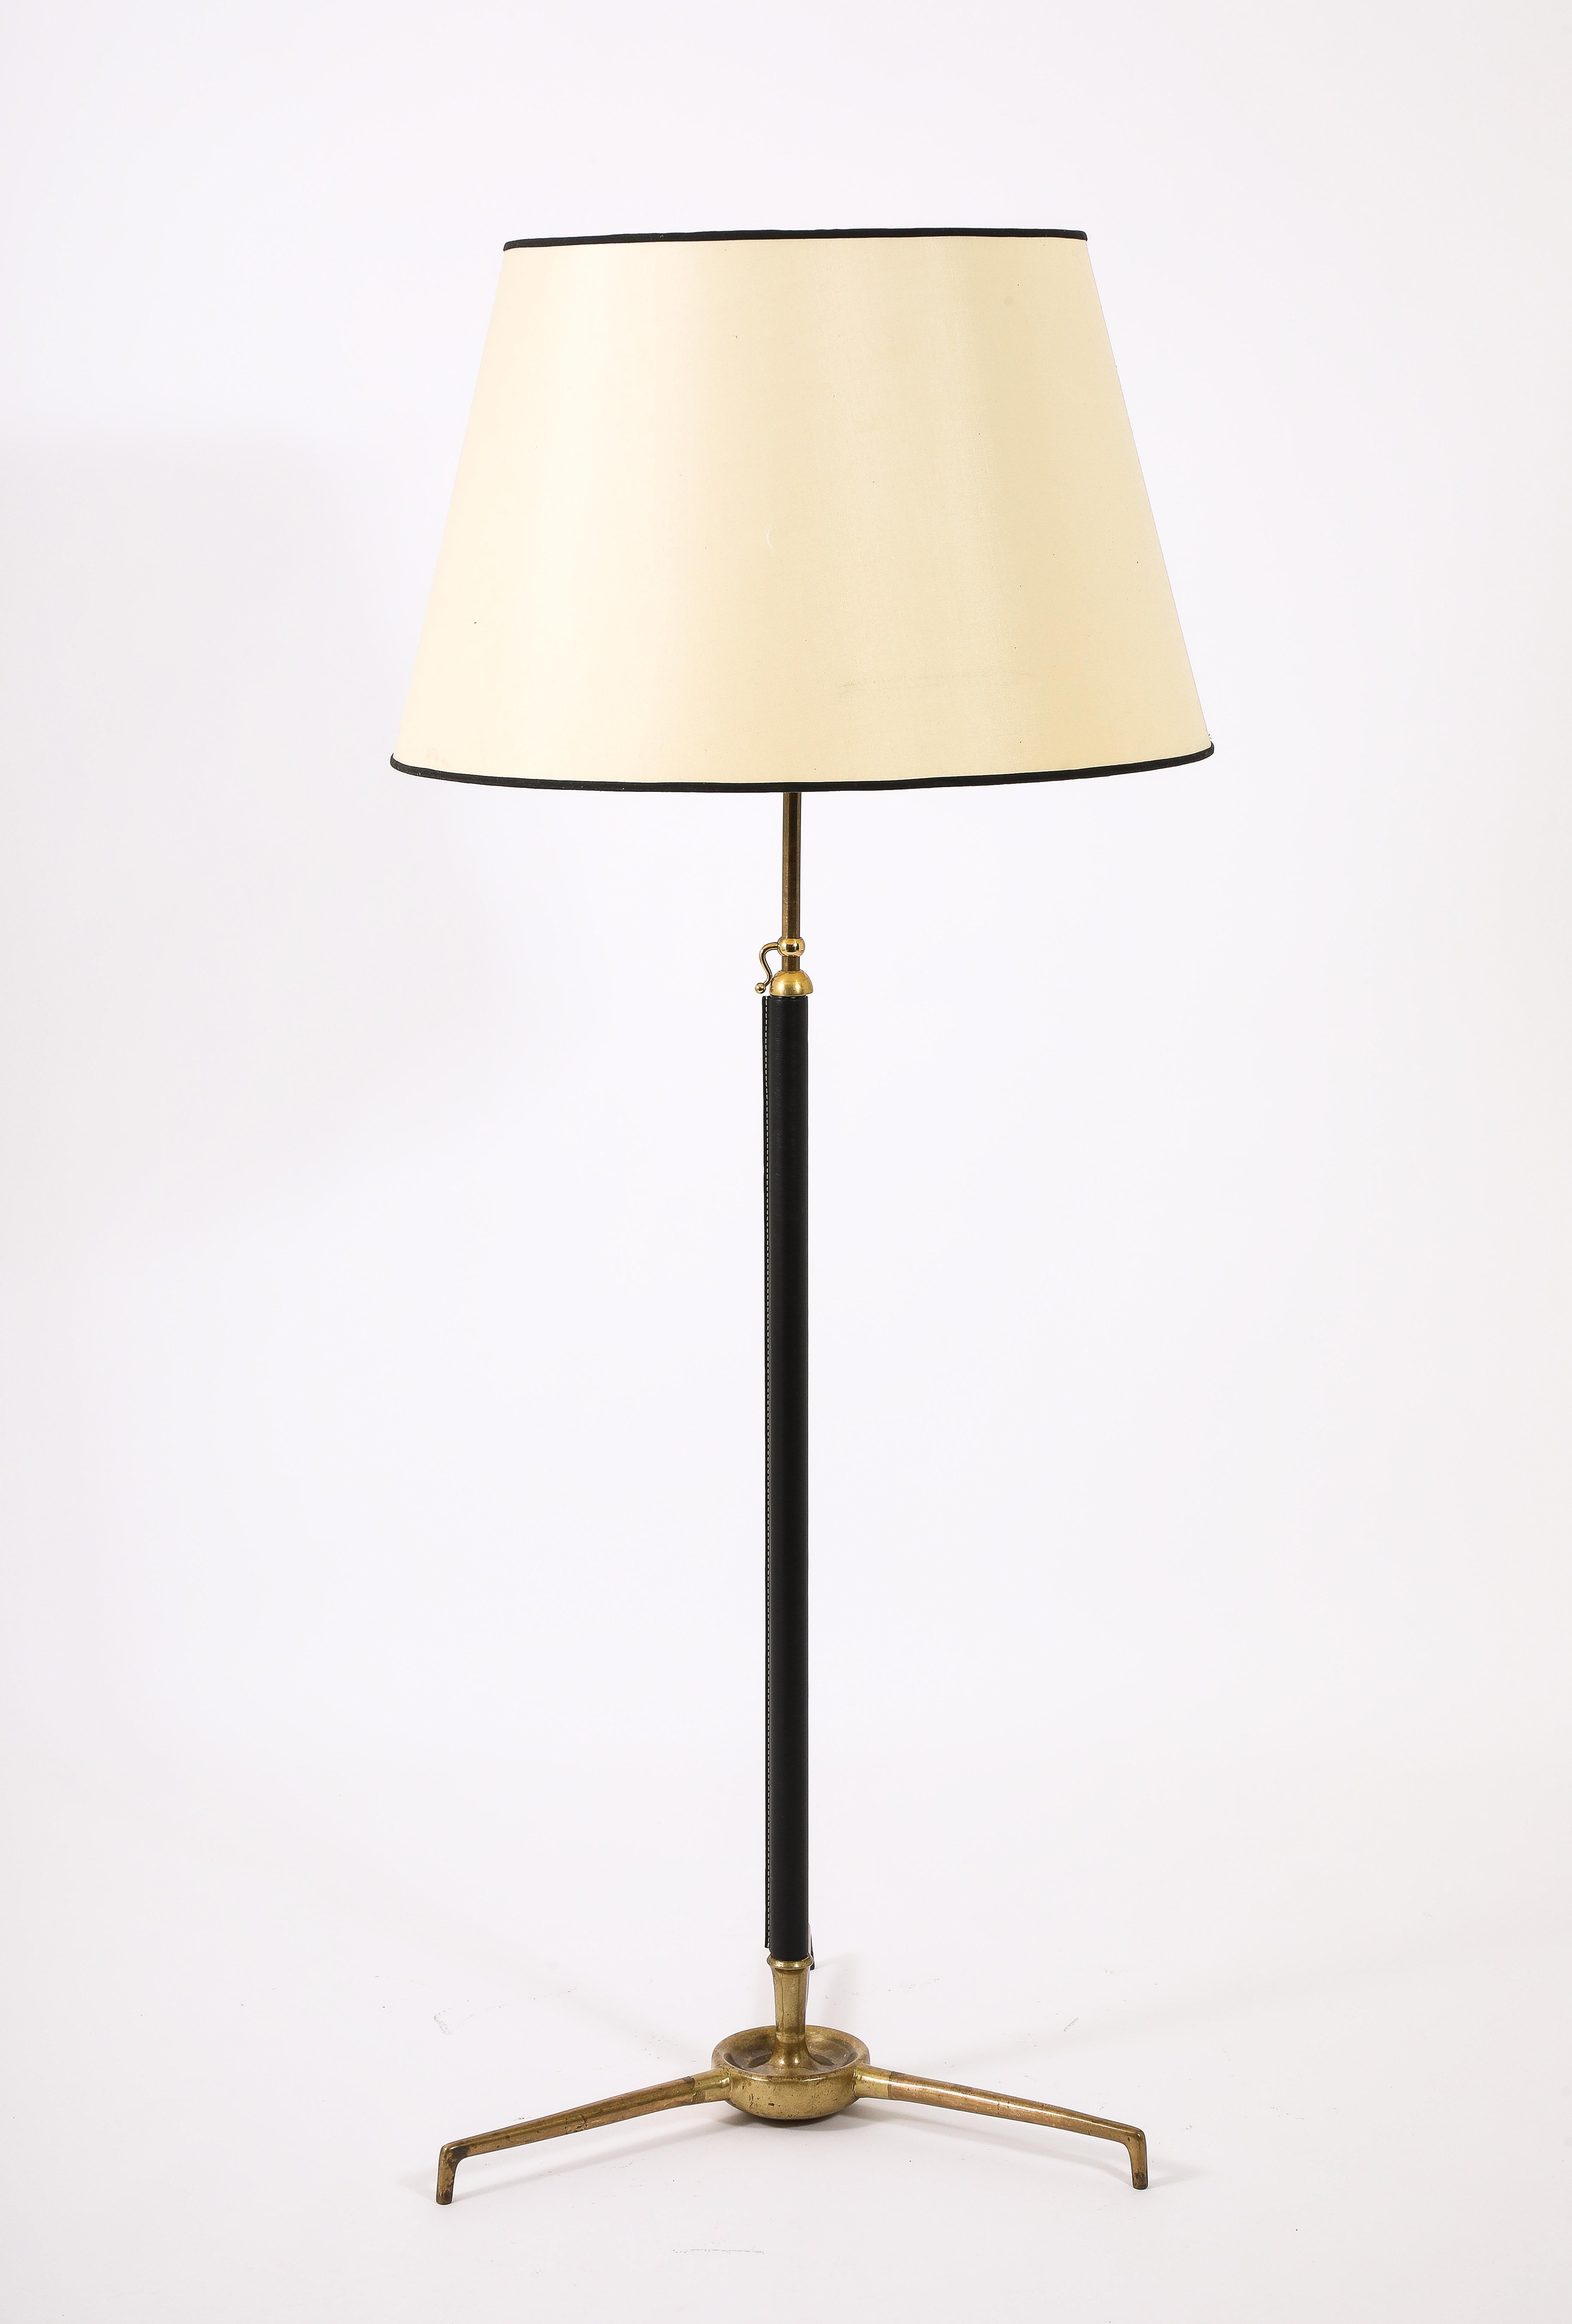 Large Bronze & Leather Floor Lamp by Arlus, France 1950's For Sale 1